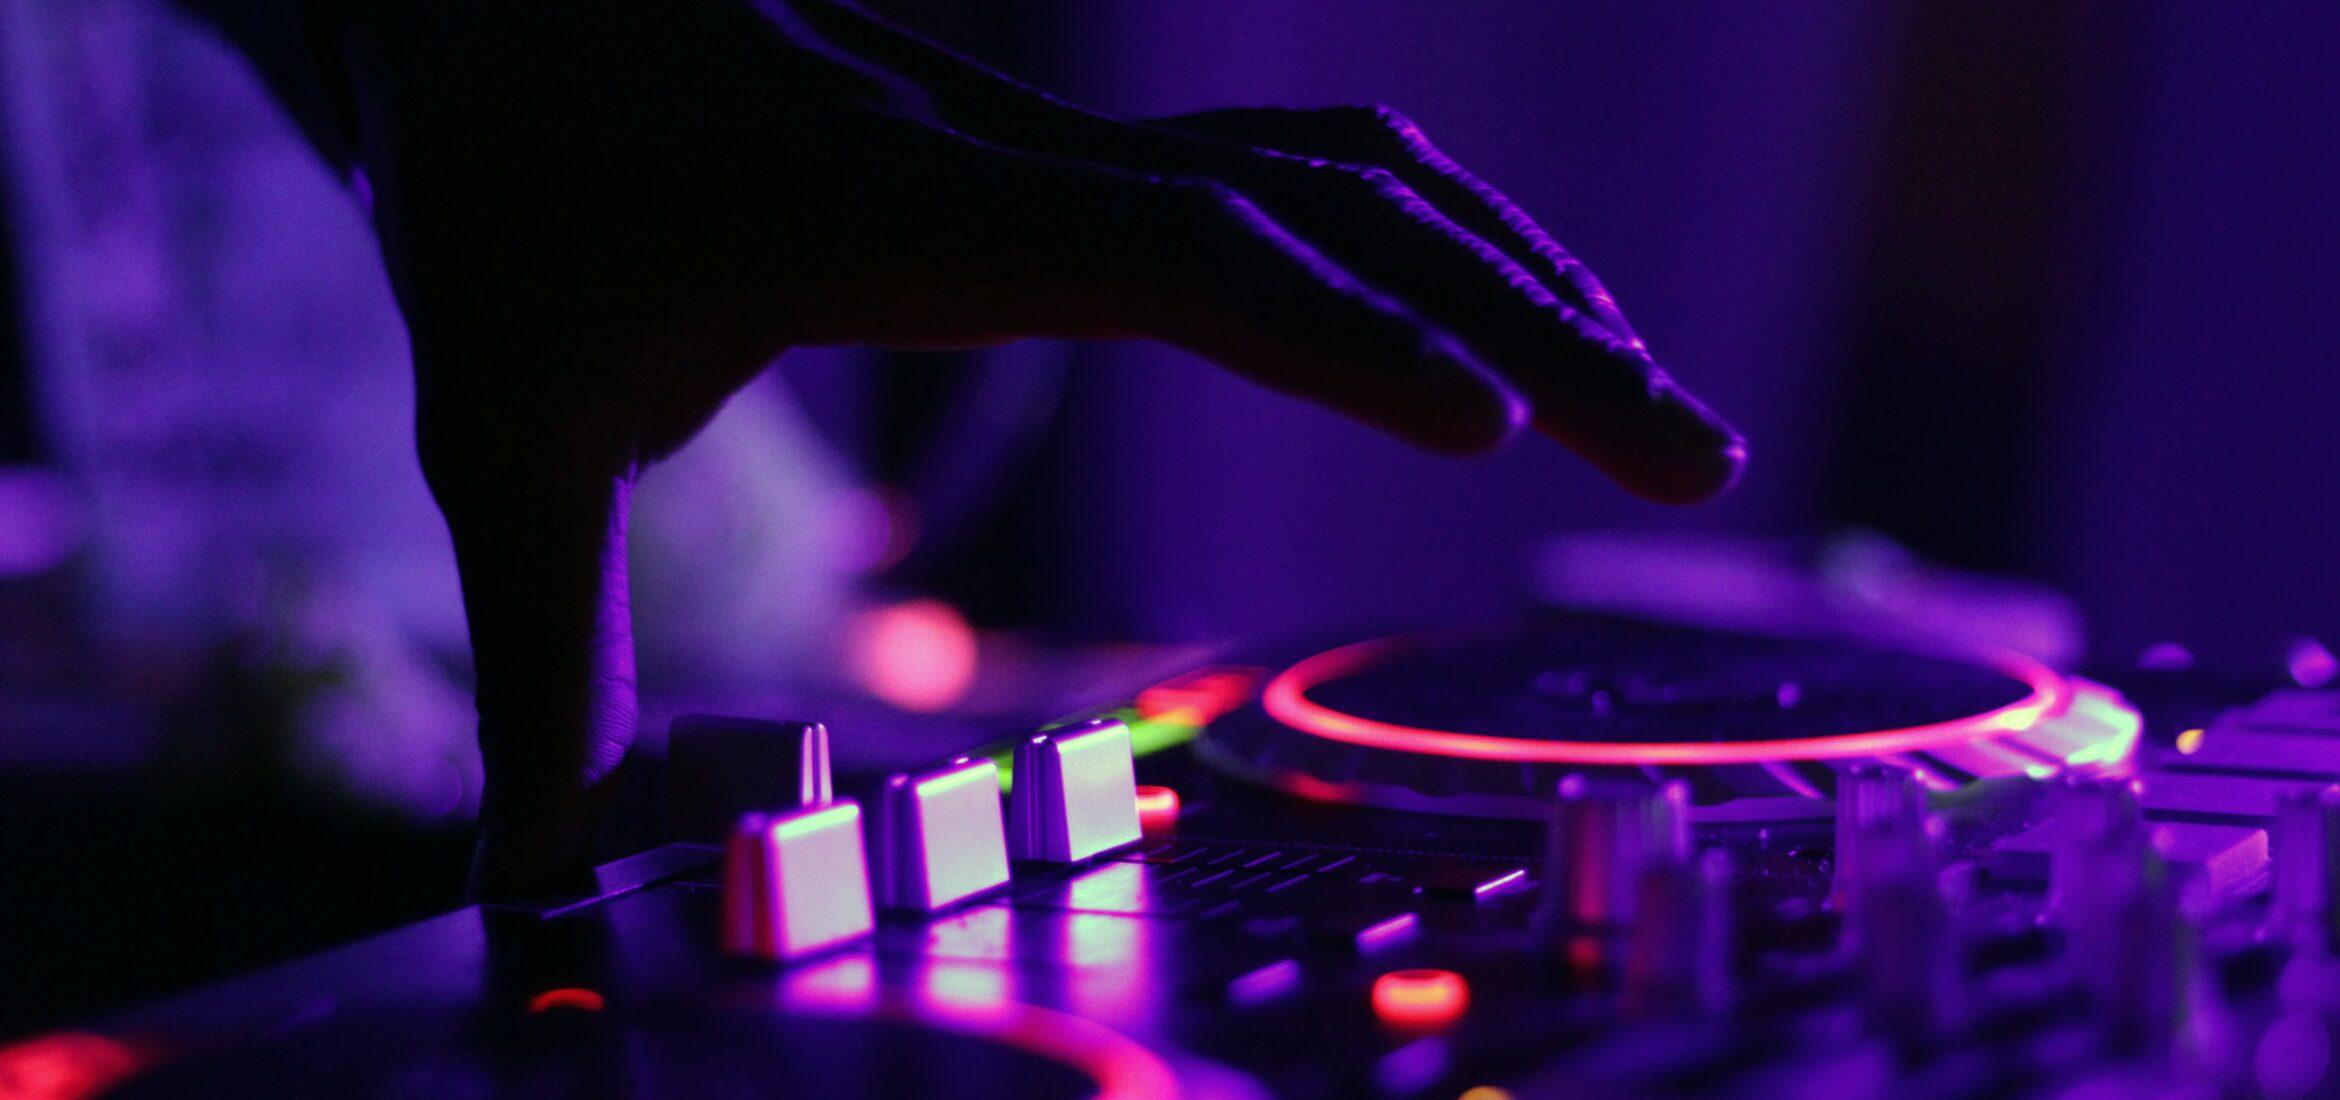 DJ Controller and DJ Mixer: What are the Differences?